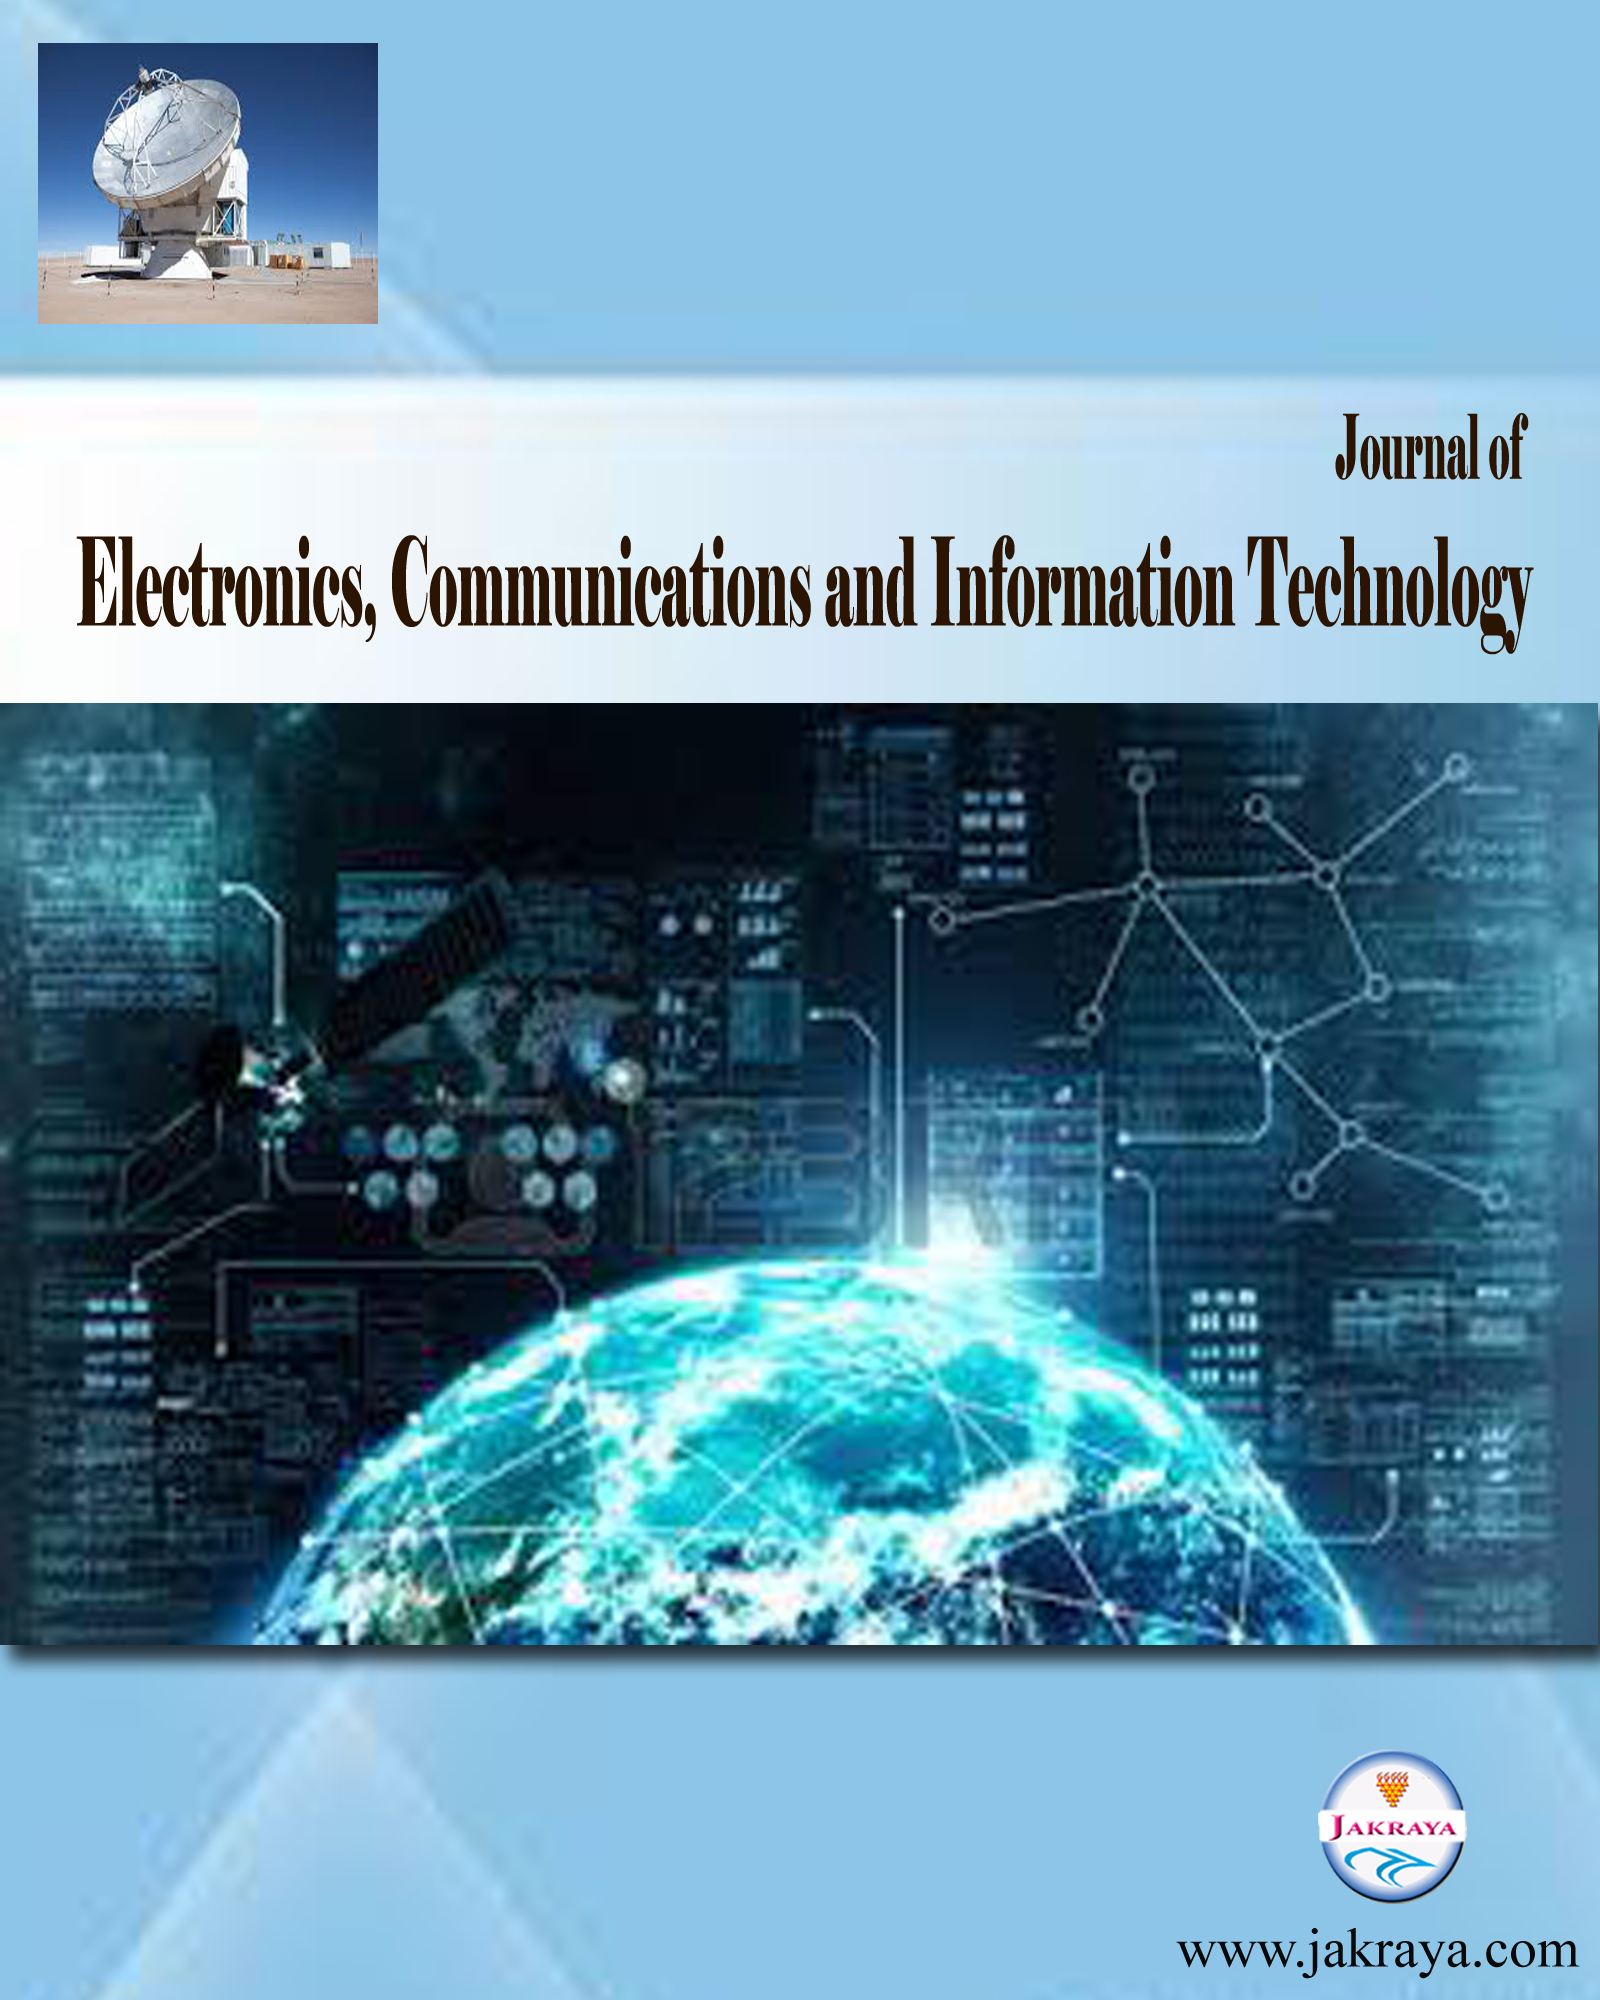 Journal of Electronics, Communications and Information Technology